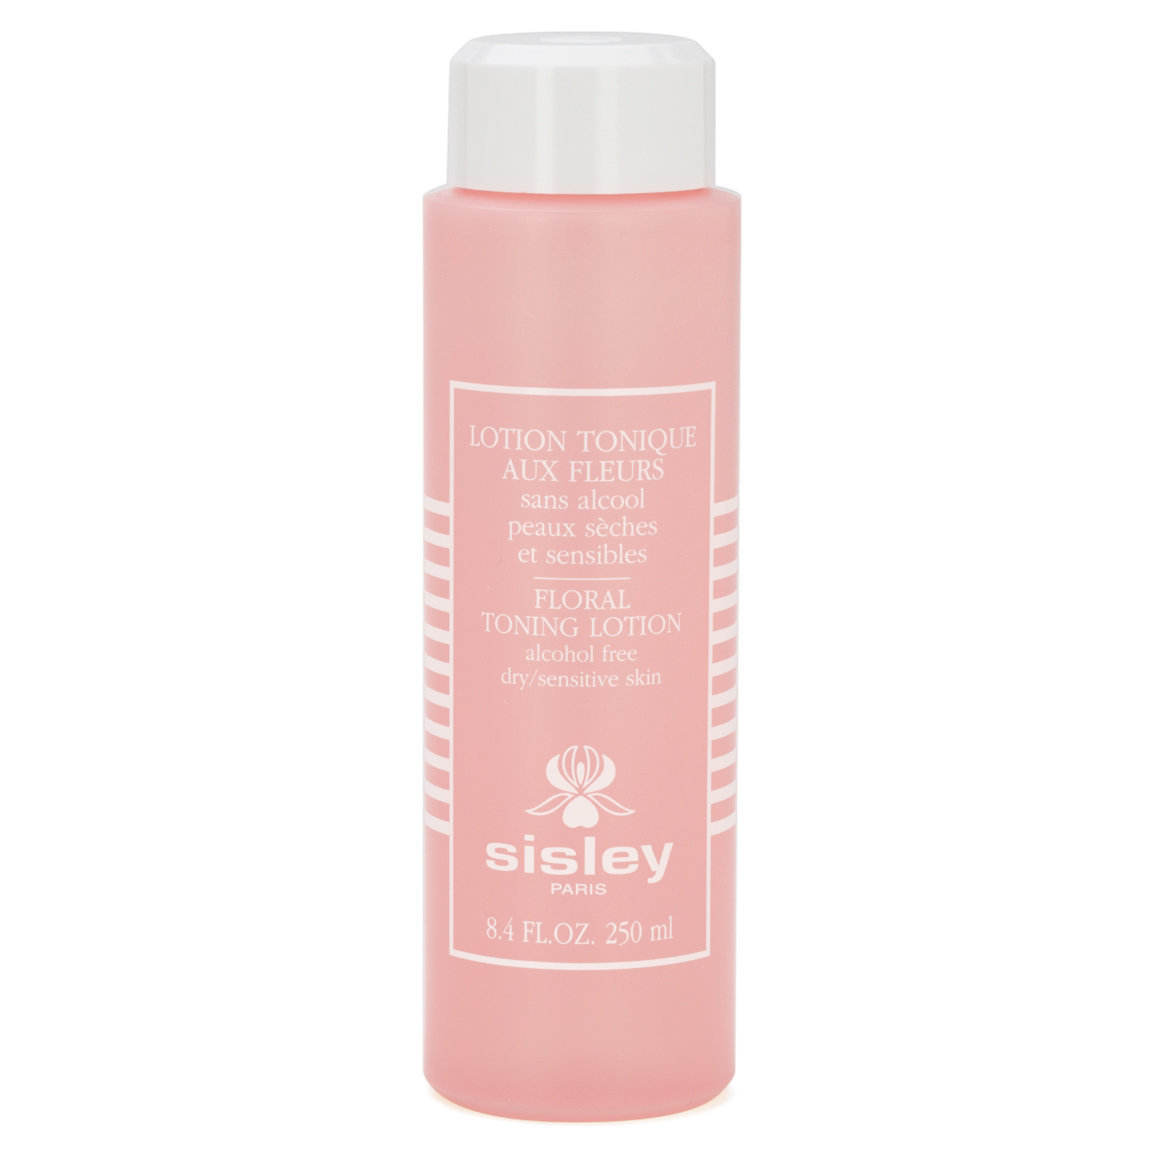 Sisley-Paris Floral Toning Lotion alternative view 1 - product swatch.